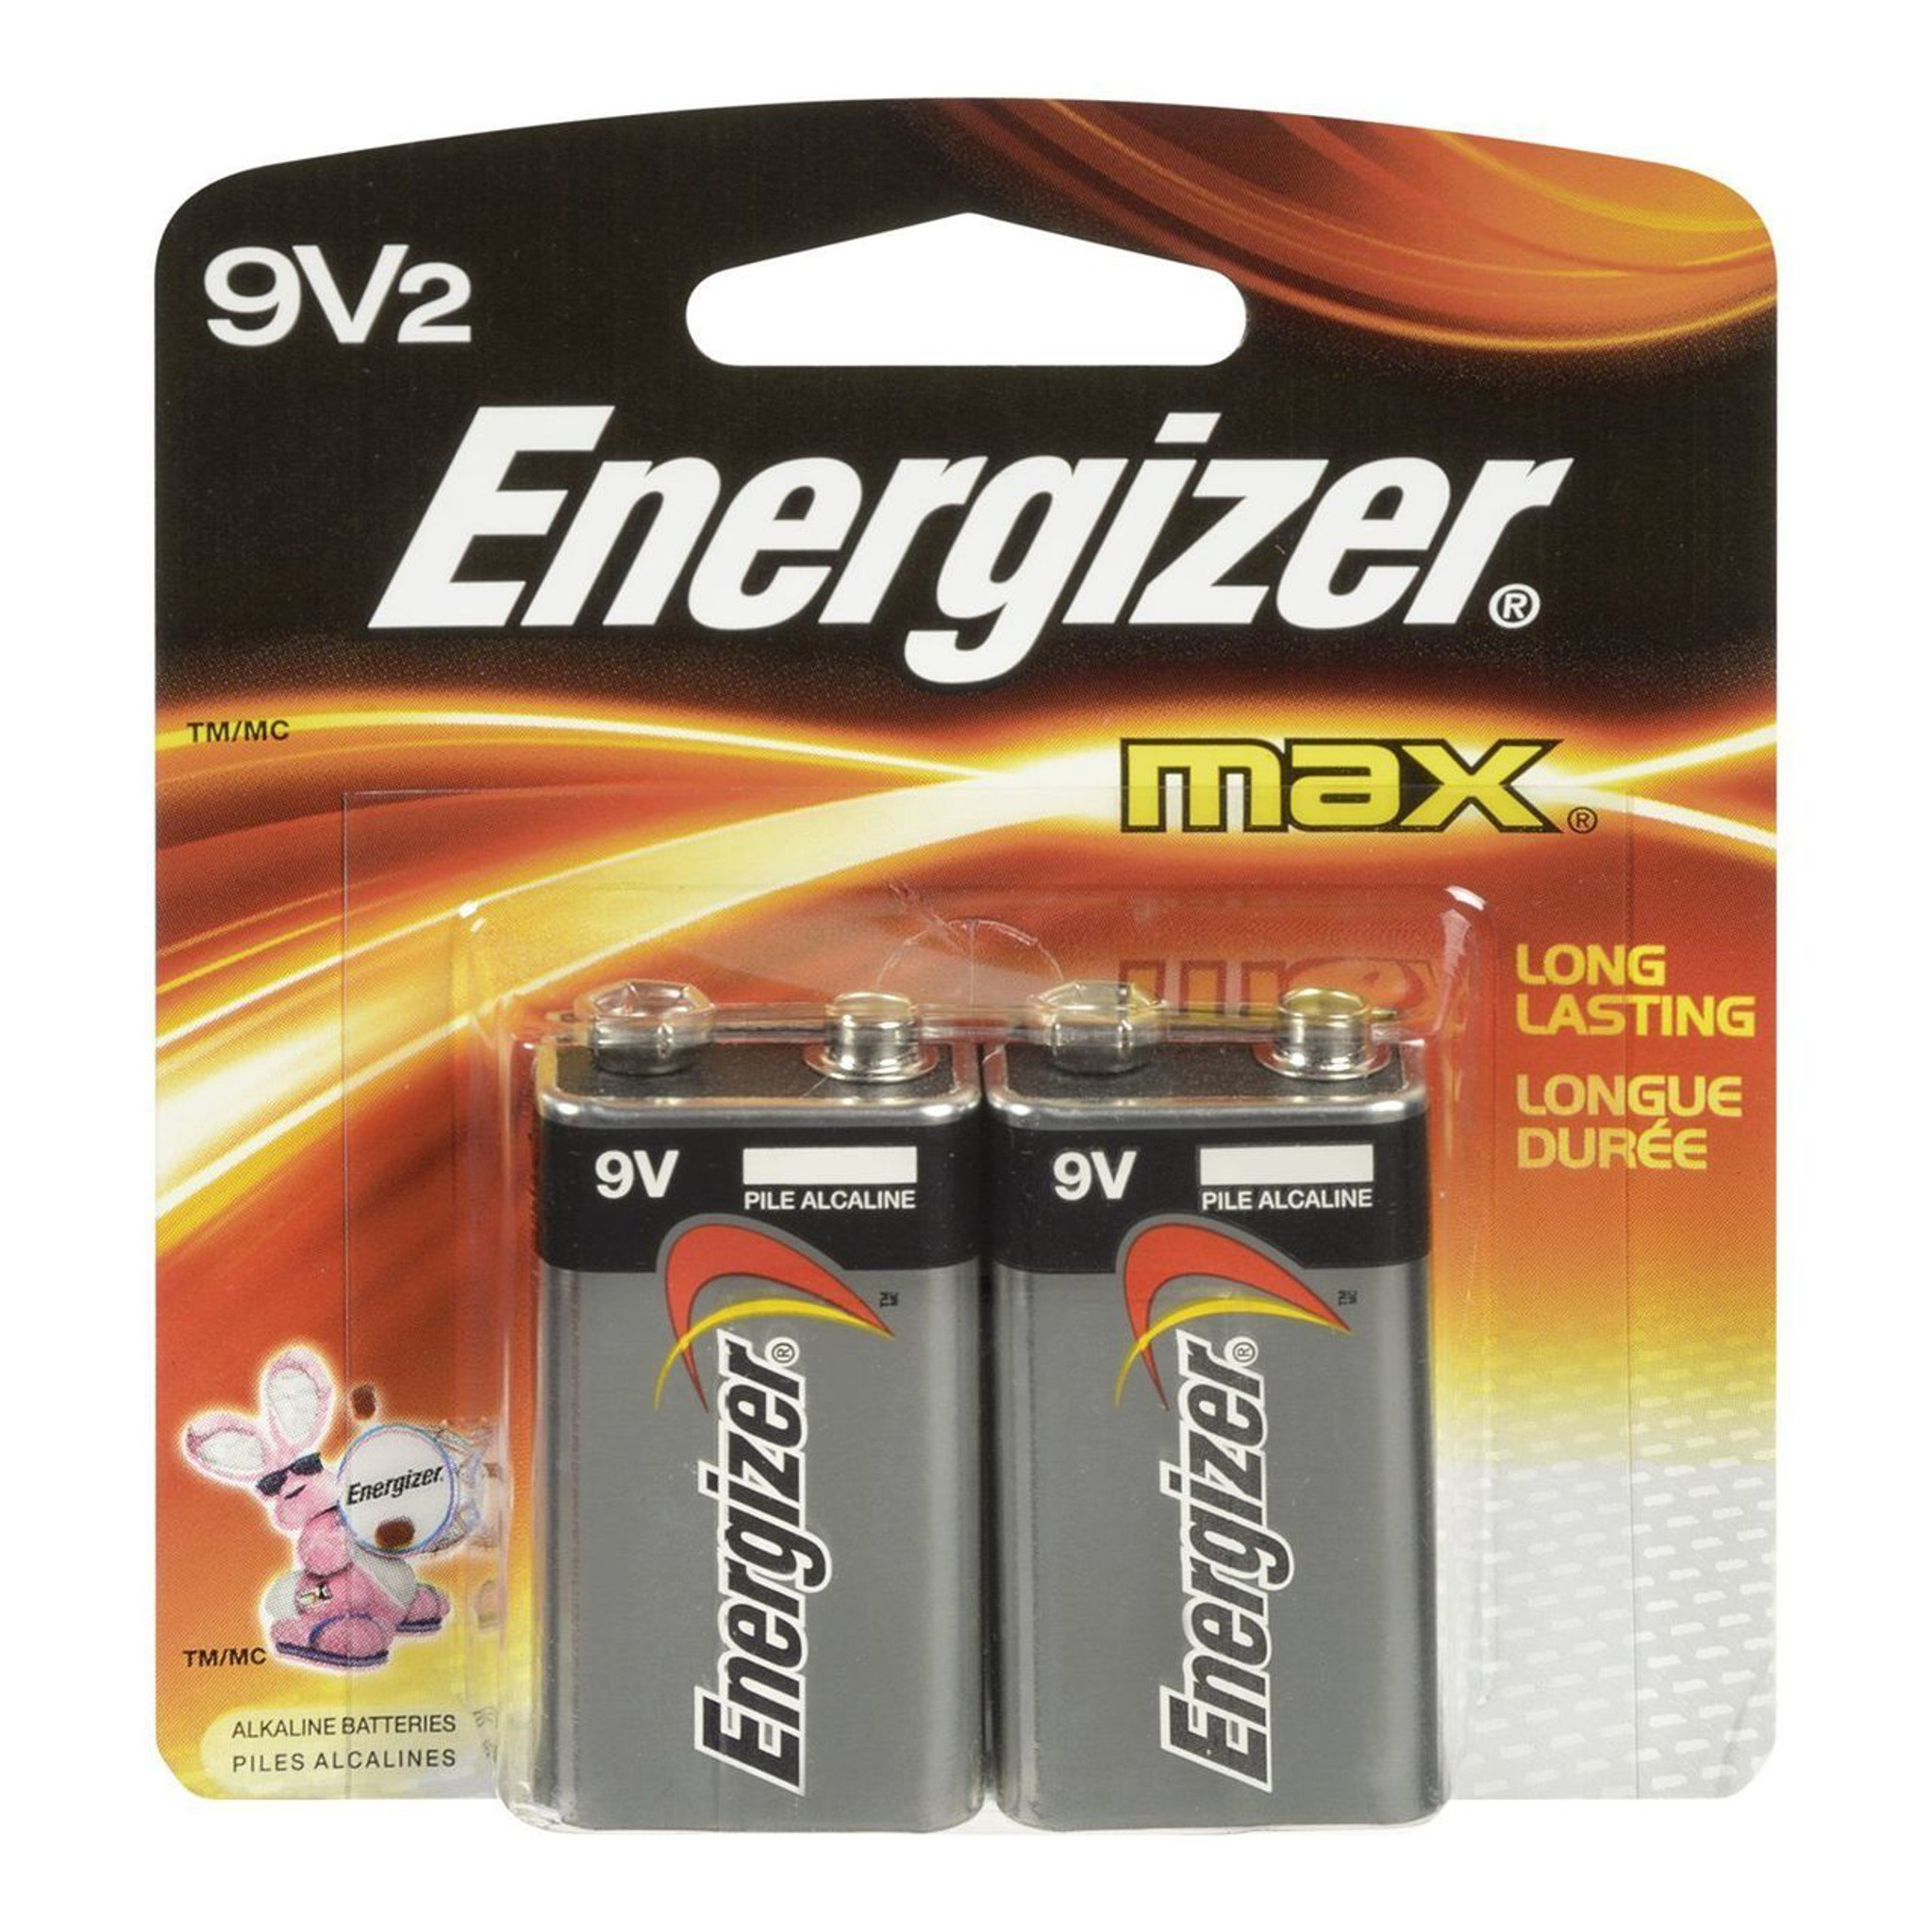 Pile Rechargeable Energizer Recharge Power Plus 9V